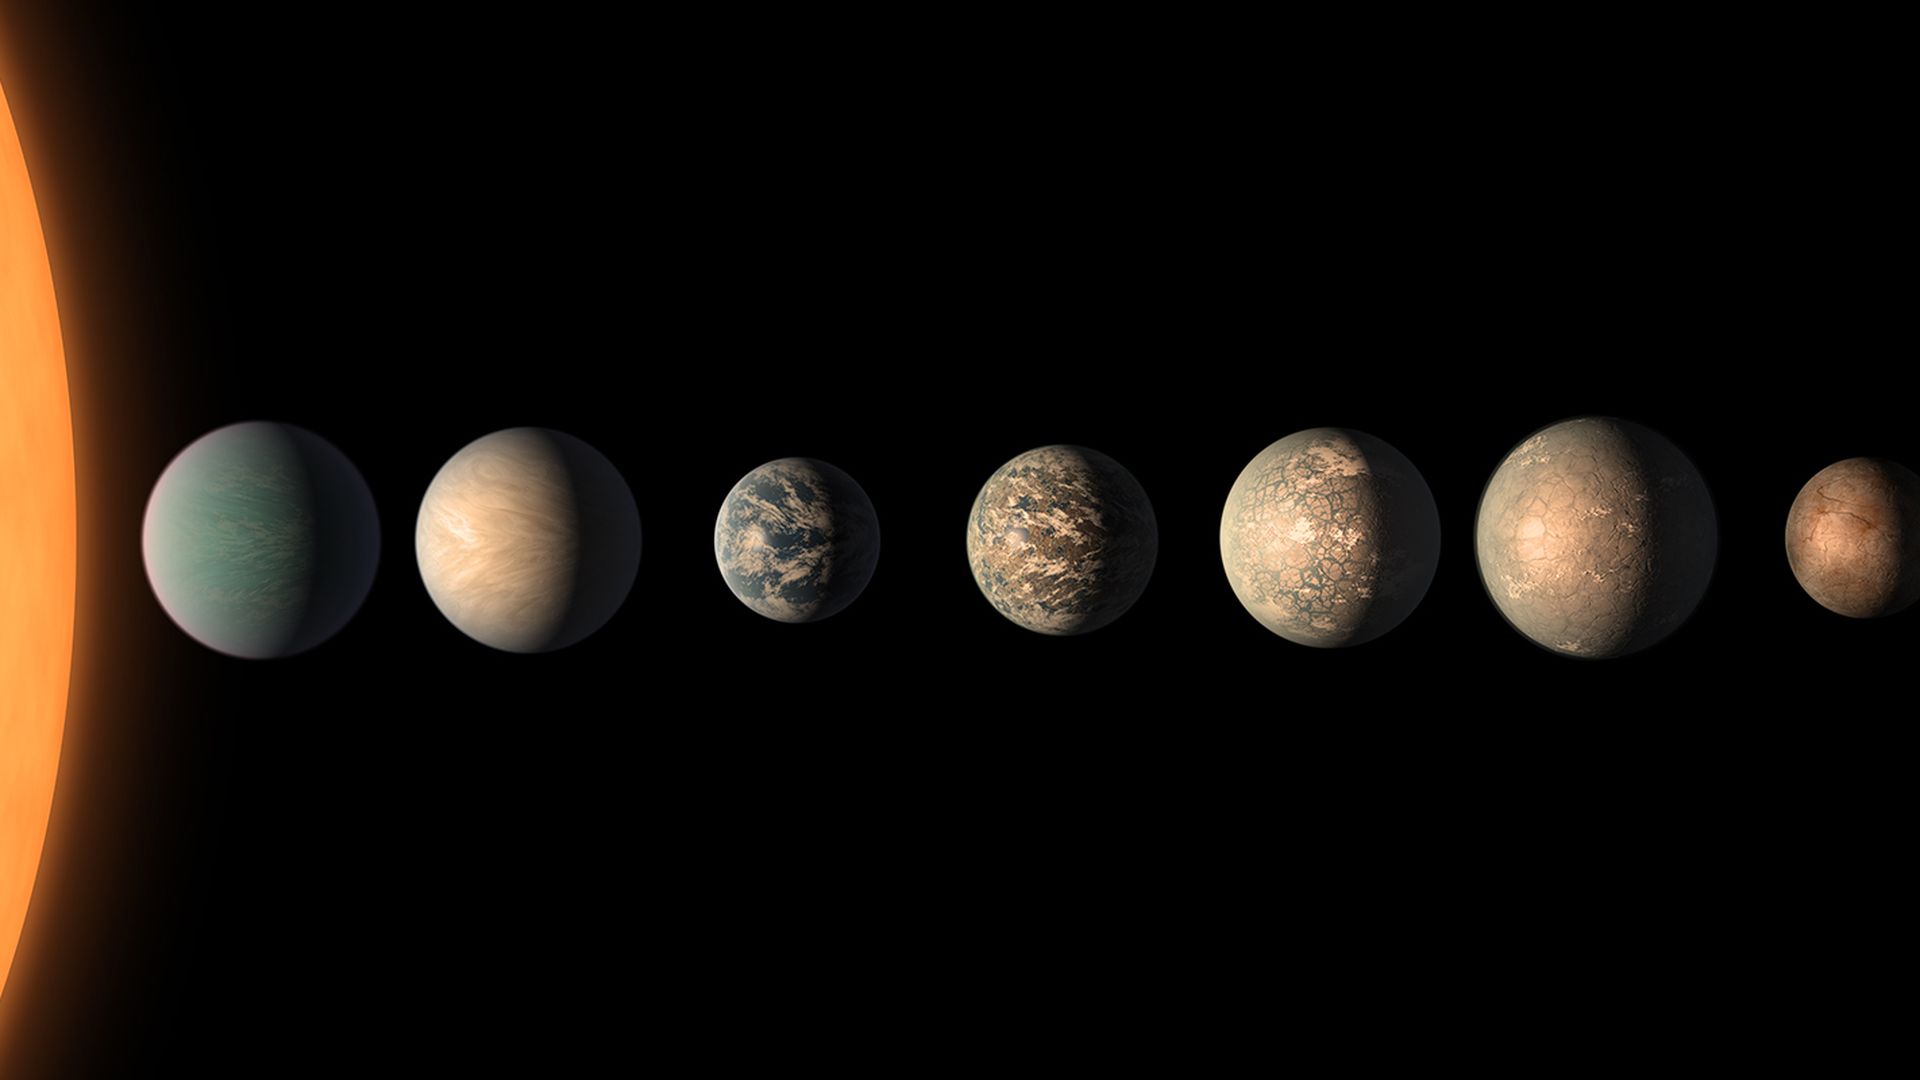 The TRAPPIST-1 system